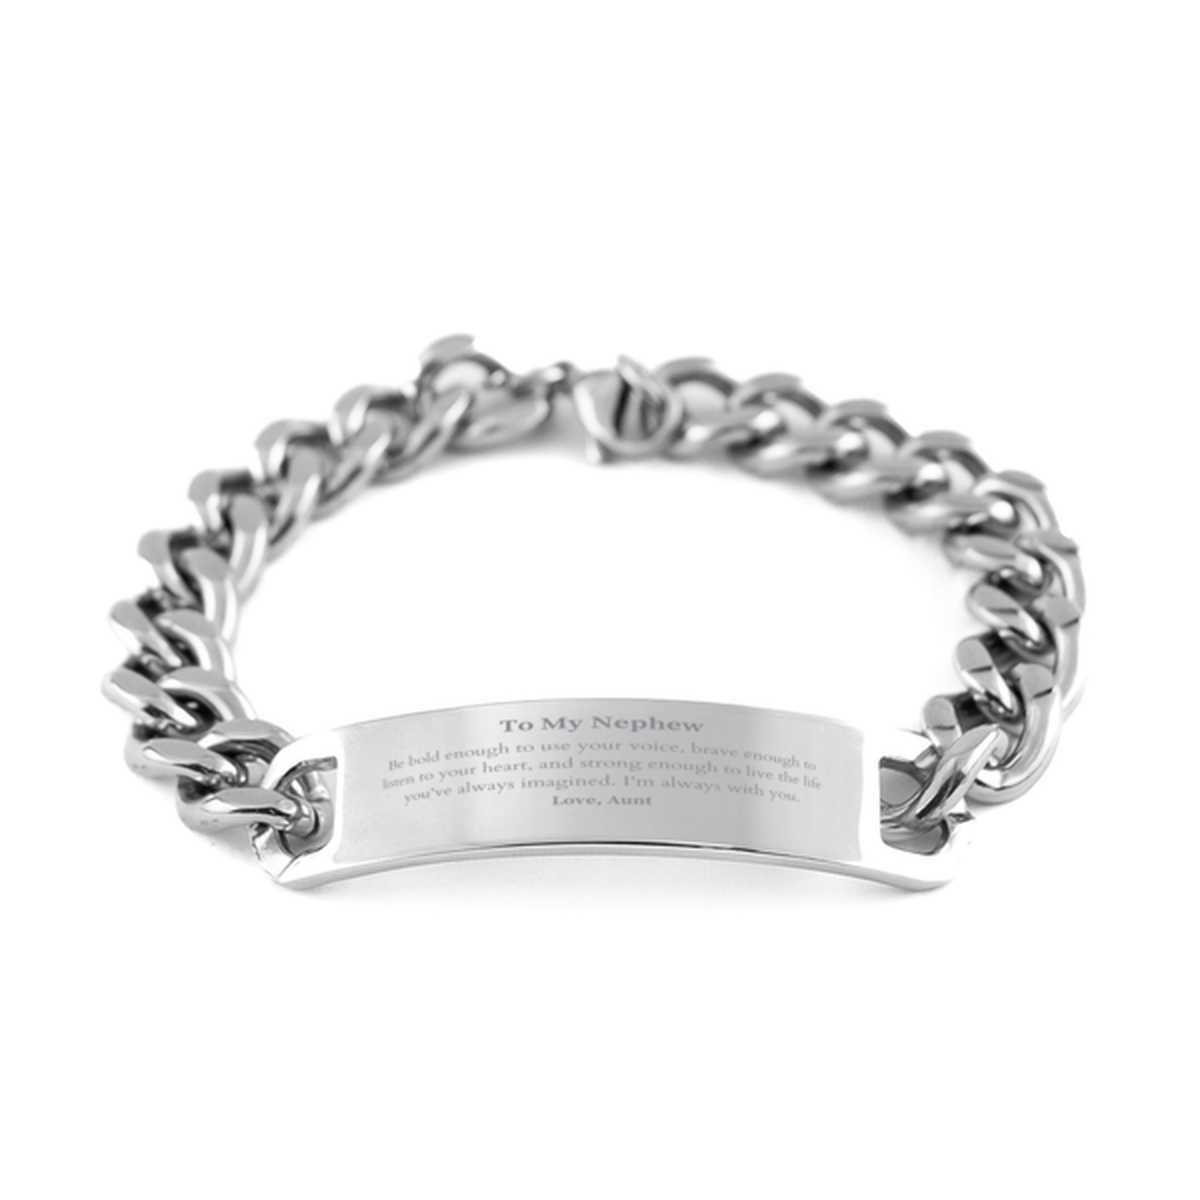 Keepsake Nephew Cuban Chain Stainless Steel Bracelet Gift Idea Graduation Christmas Birthday Nephew from Aunt, Nephew Be bold enough to use your voice, brave enough to listen to your heart. Love, Aunt